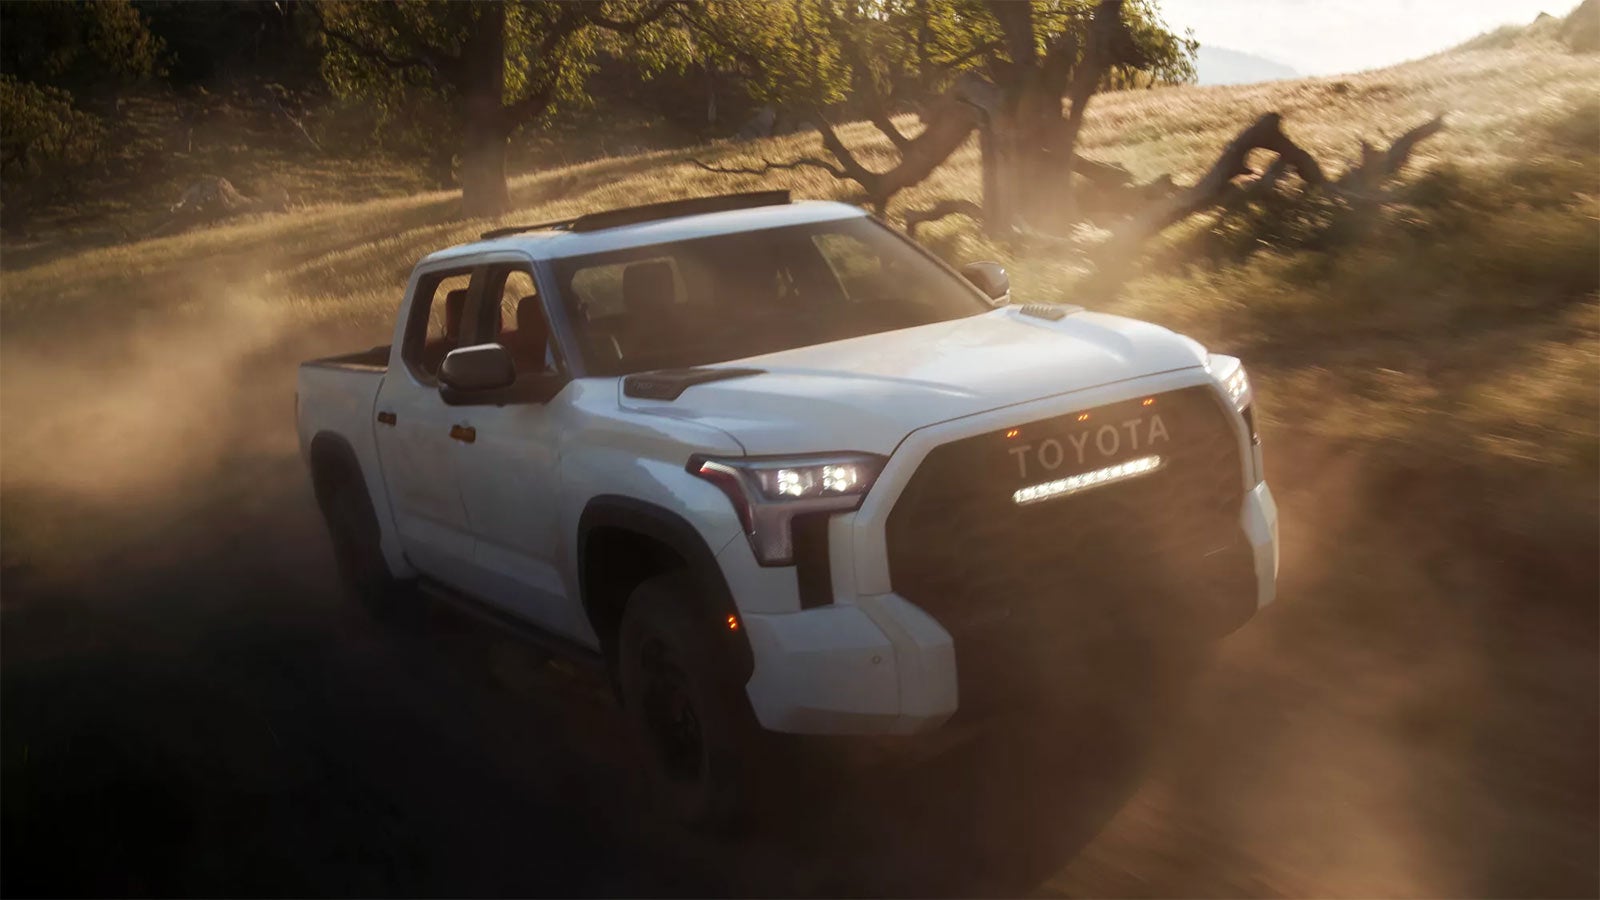 2022 Toyota Tundra Gallery | Simi Valley Toyota in Simi Valley CA